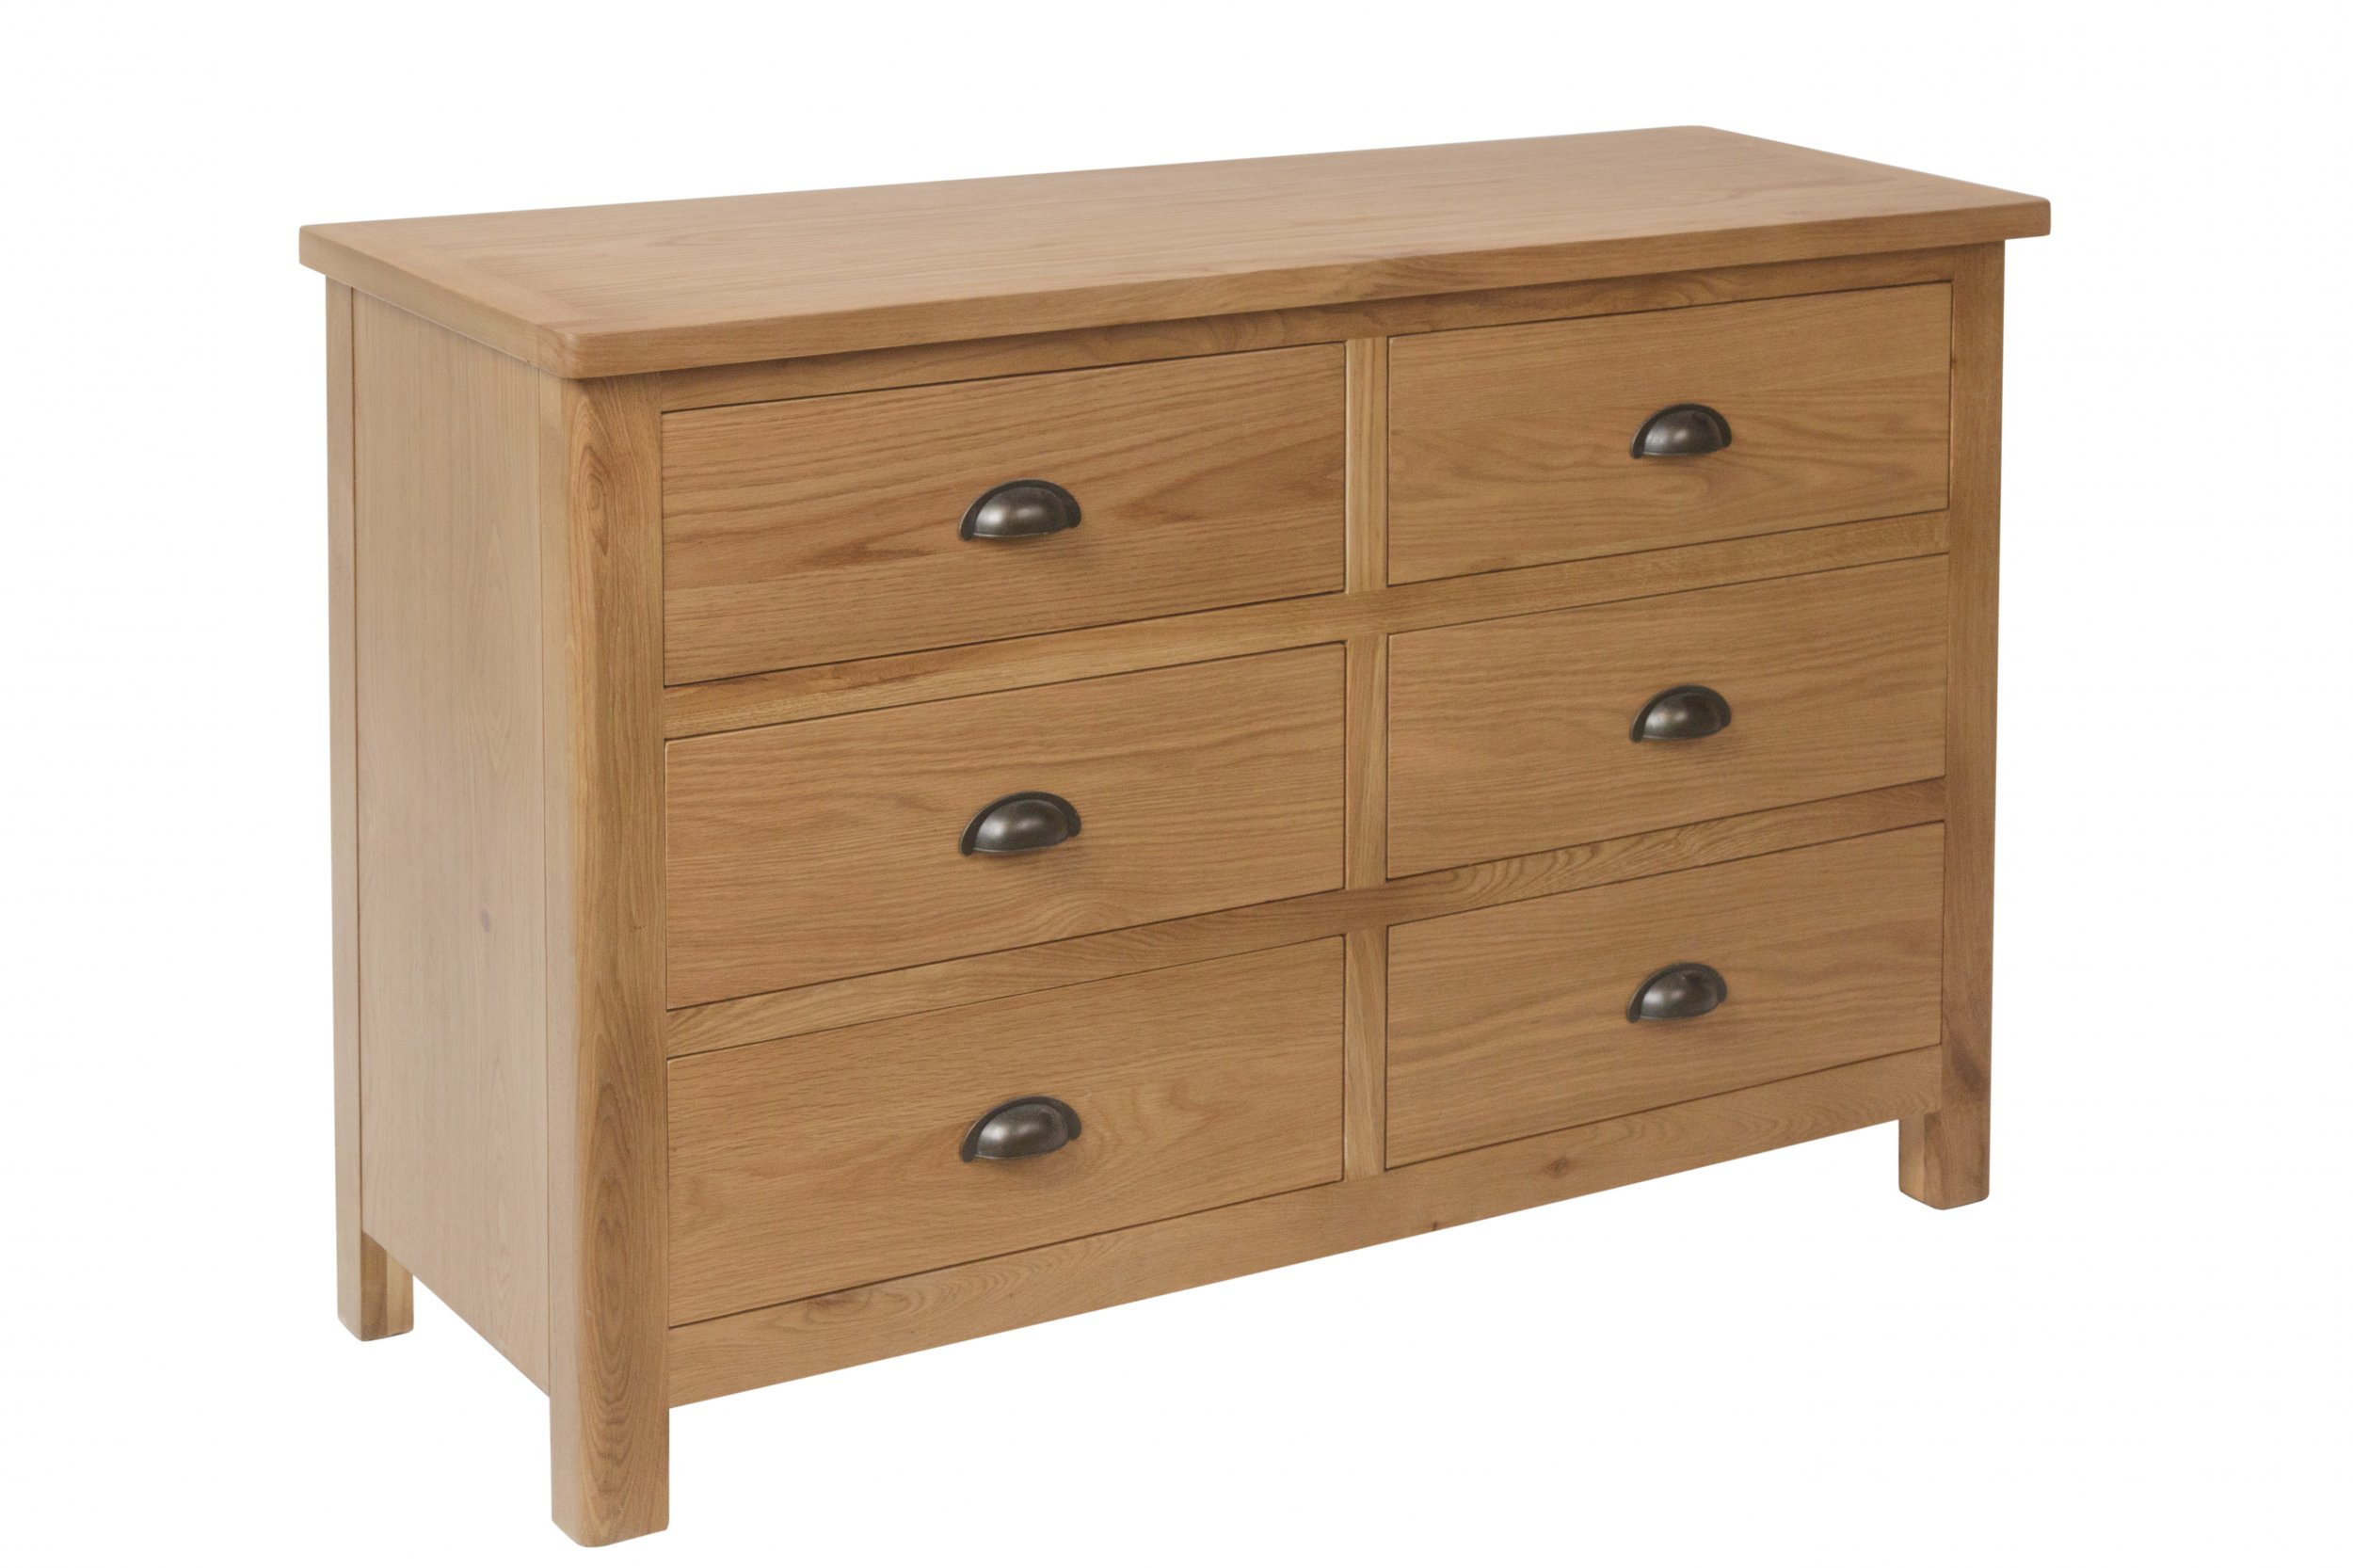 Ranby Oak Bedroom 6 Drawer Chest The Clearance Zone